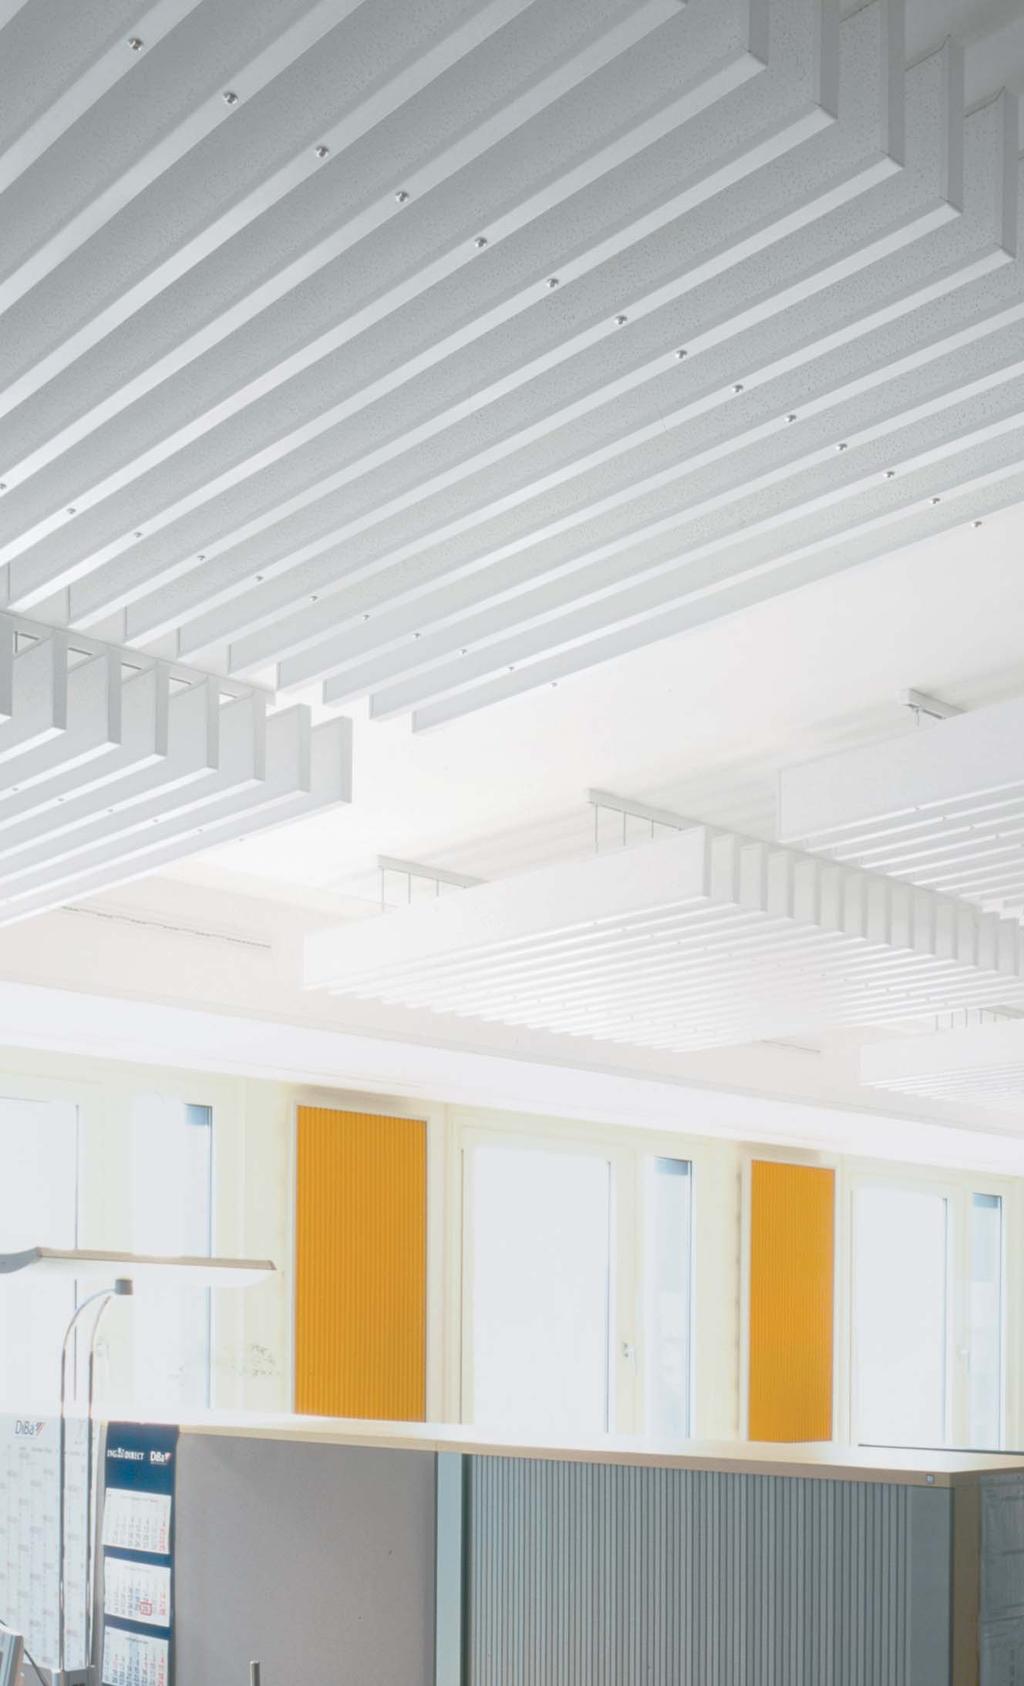 Where acoustics have been neglected Unit Unit is ideal for retrofi tting, especially where acoustic problems with concrete ceilings are identifi ed